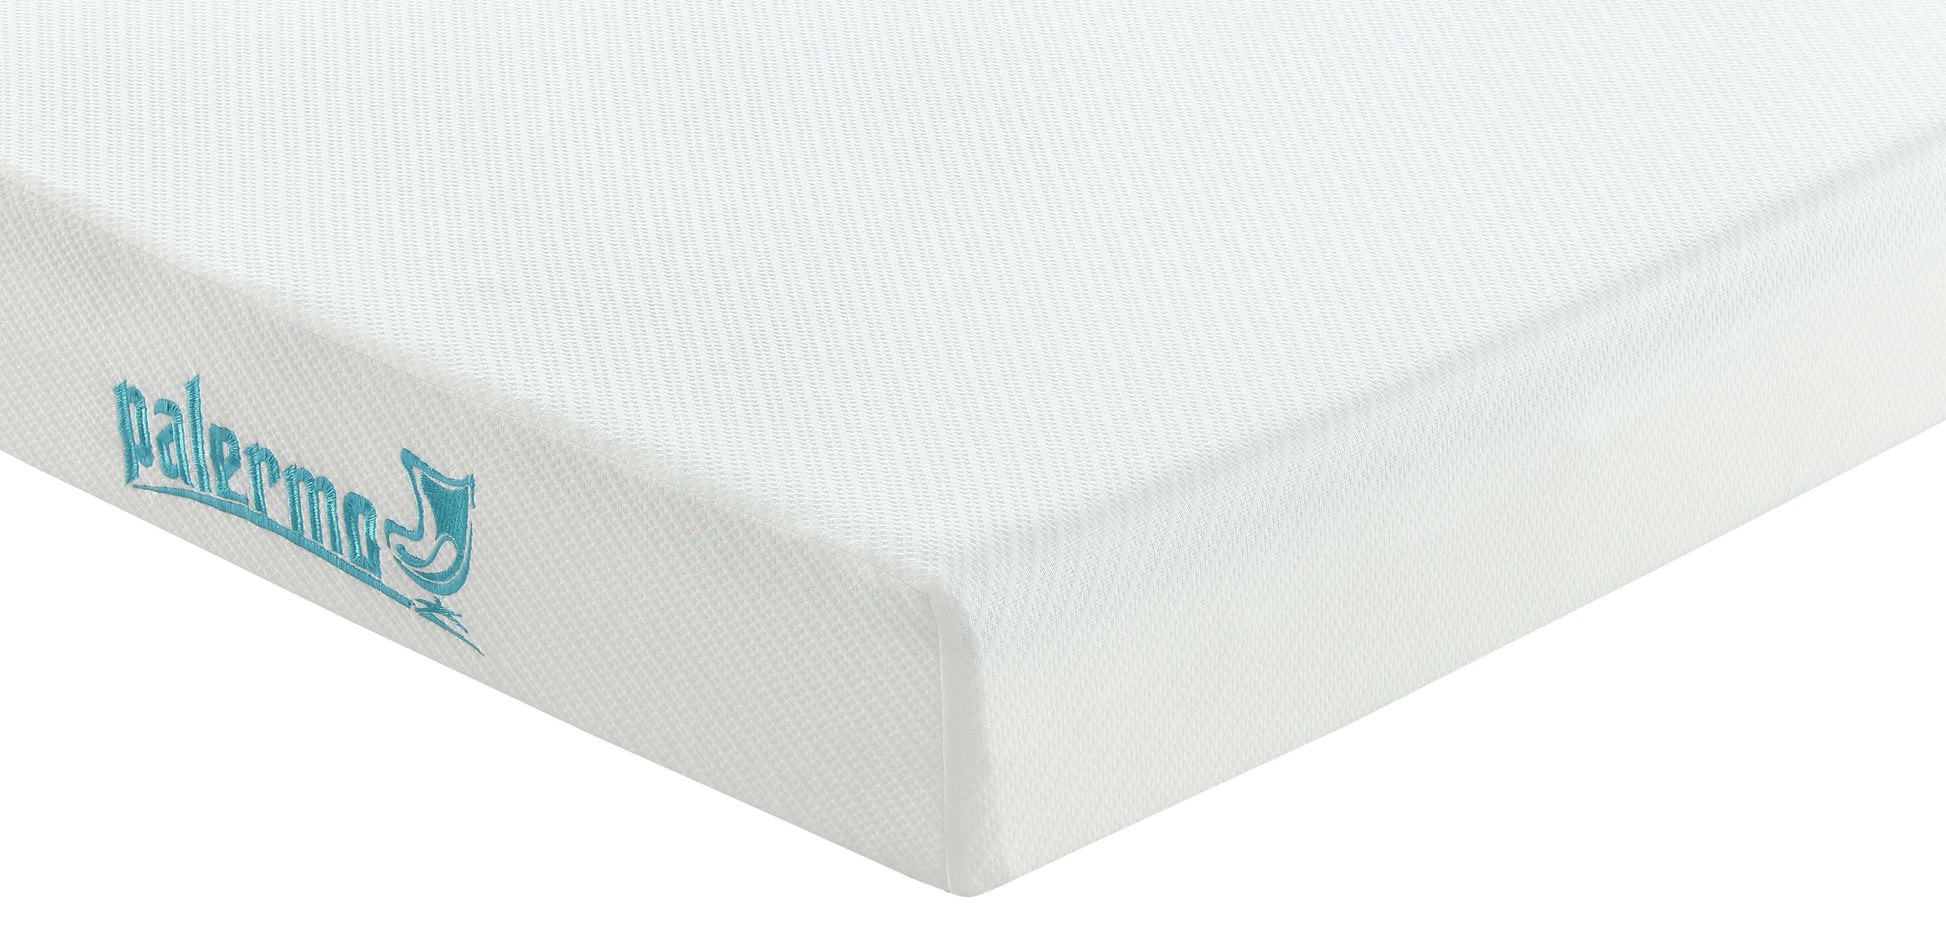 Palermo King Single Mattress Memory Foam Green Tea Infused CertiPUR Approved - image7